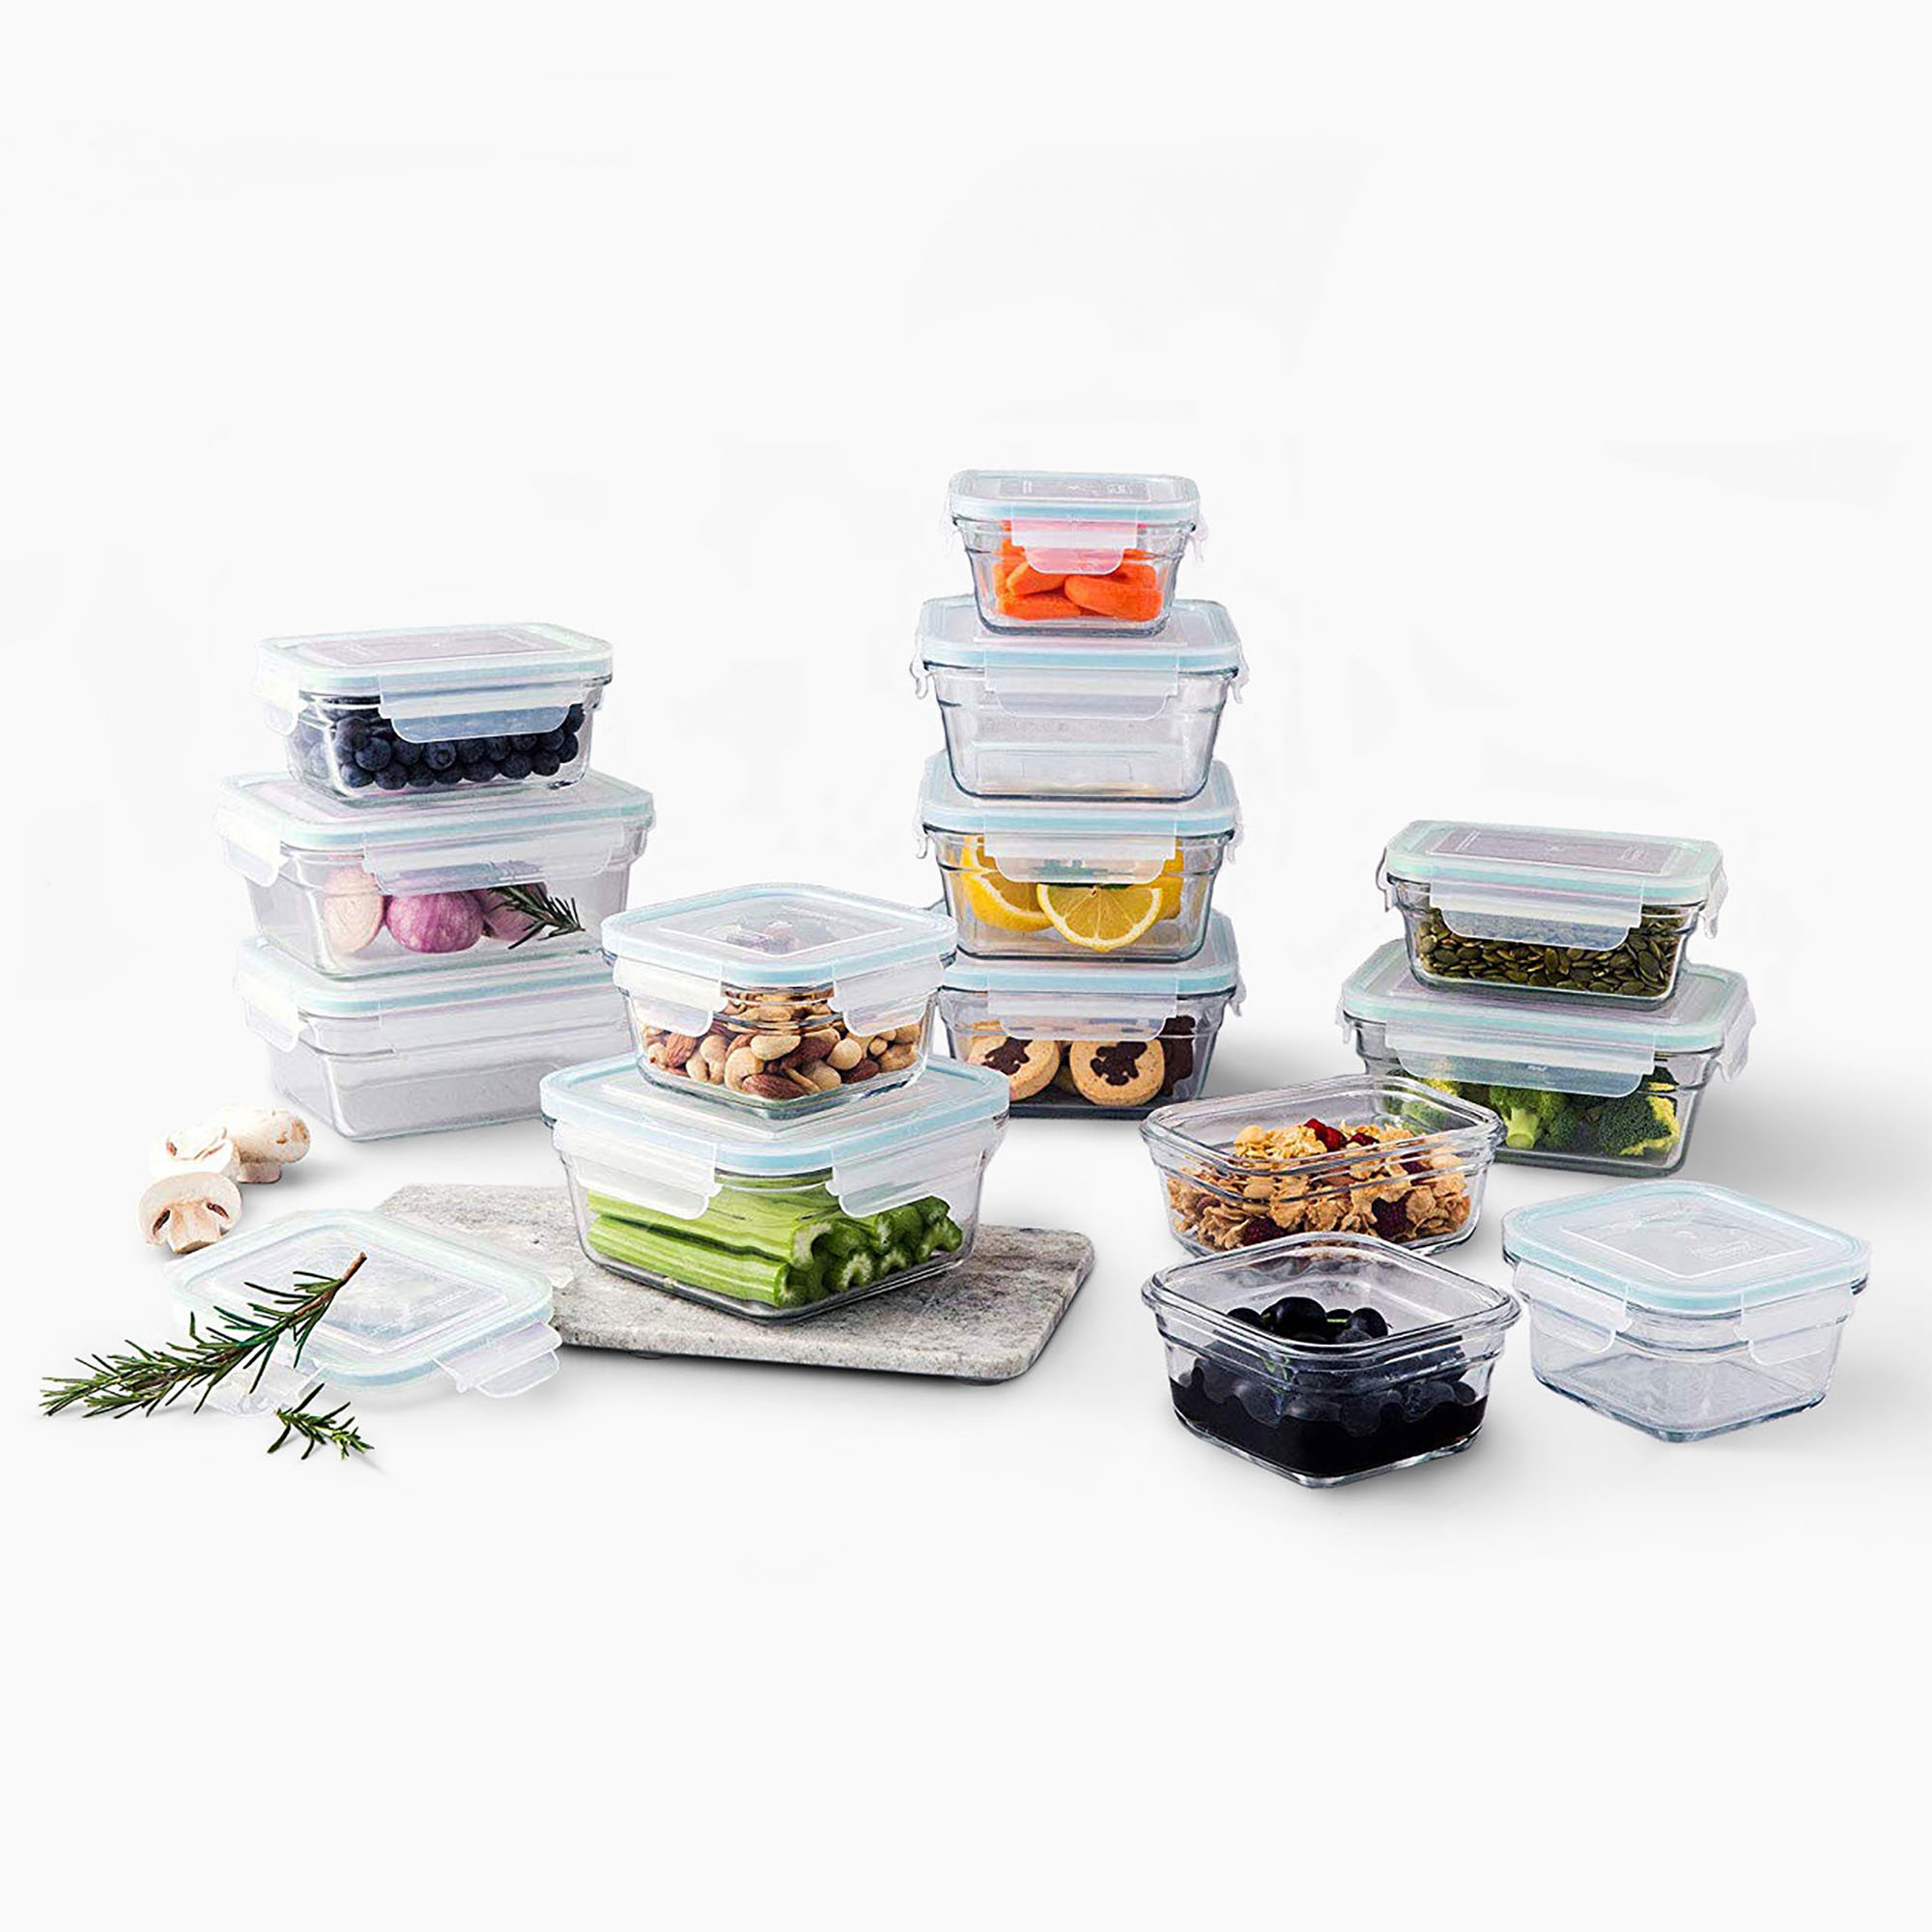 Glasslock Oven and Microwave Safe Glass Food Storage Containers 28 Piece Set - image 1 of 6